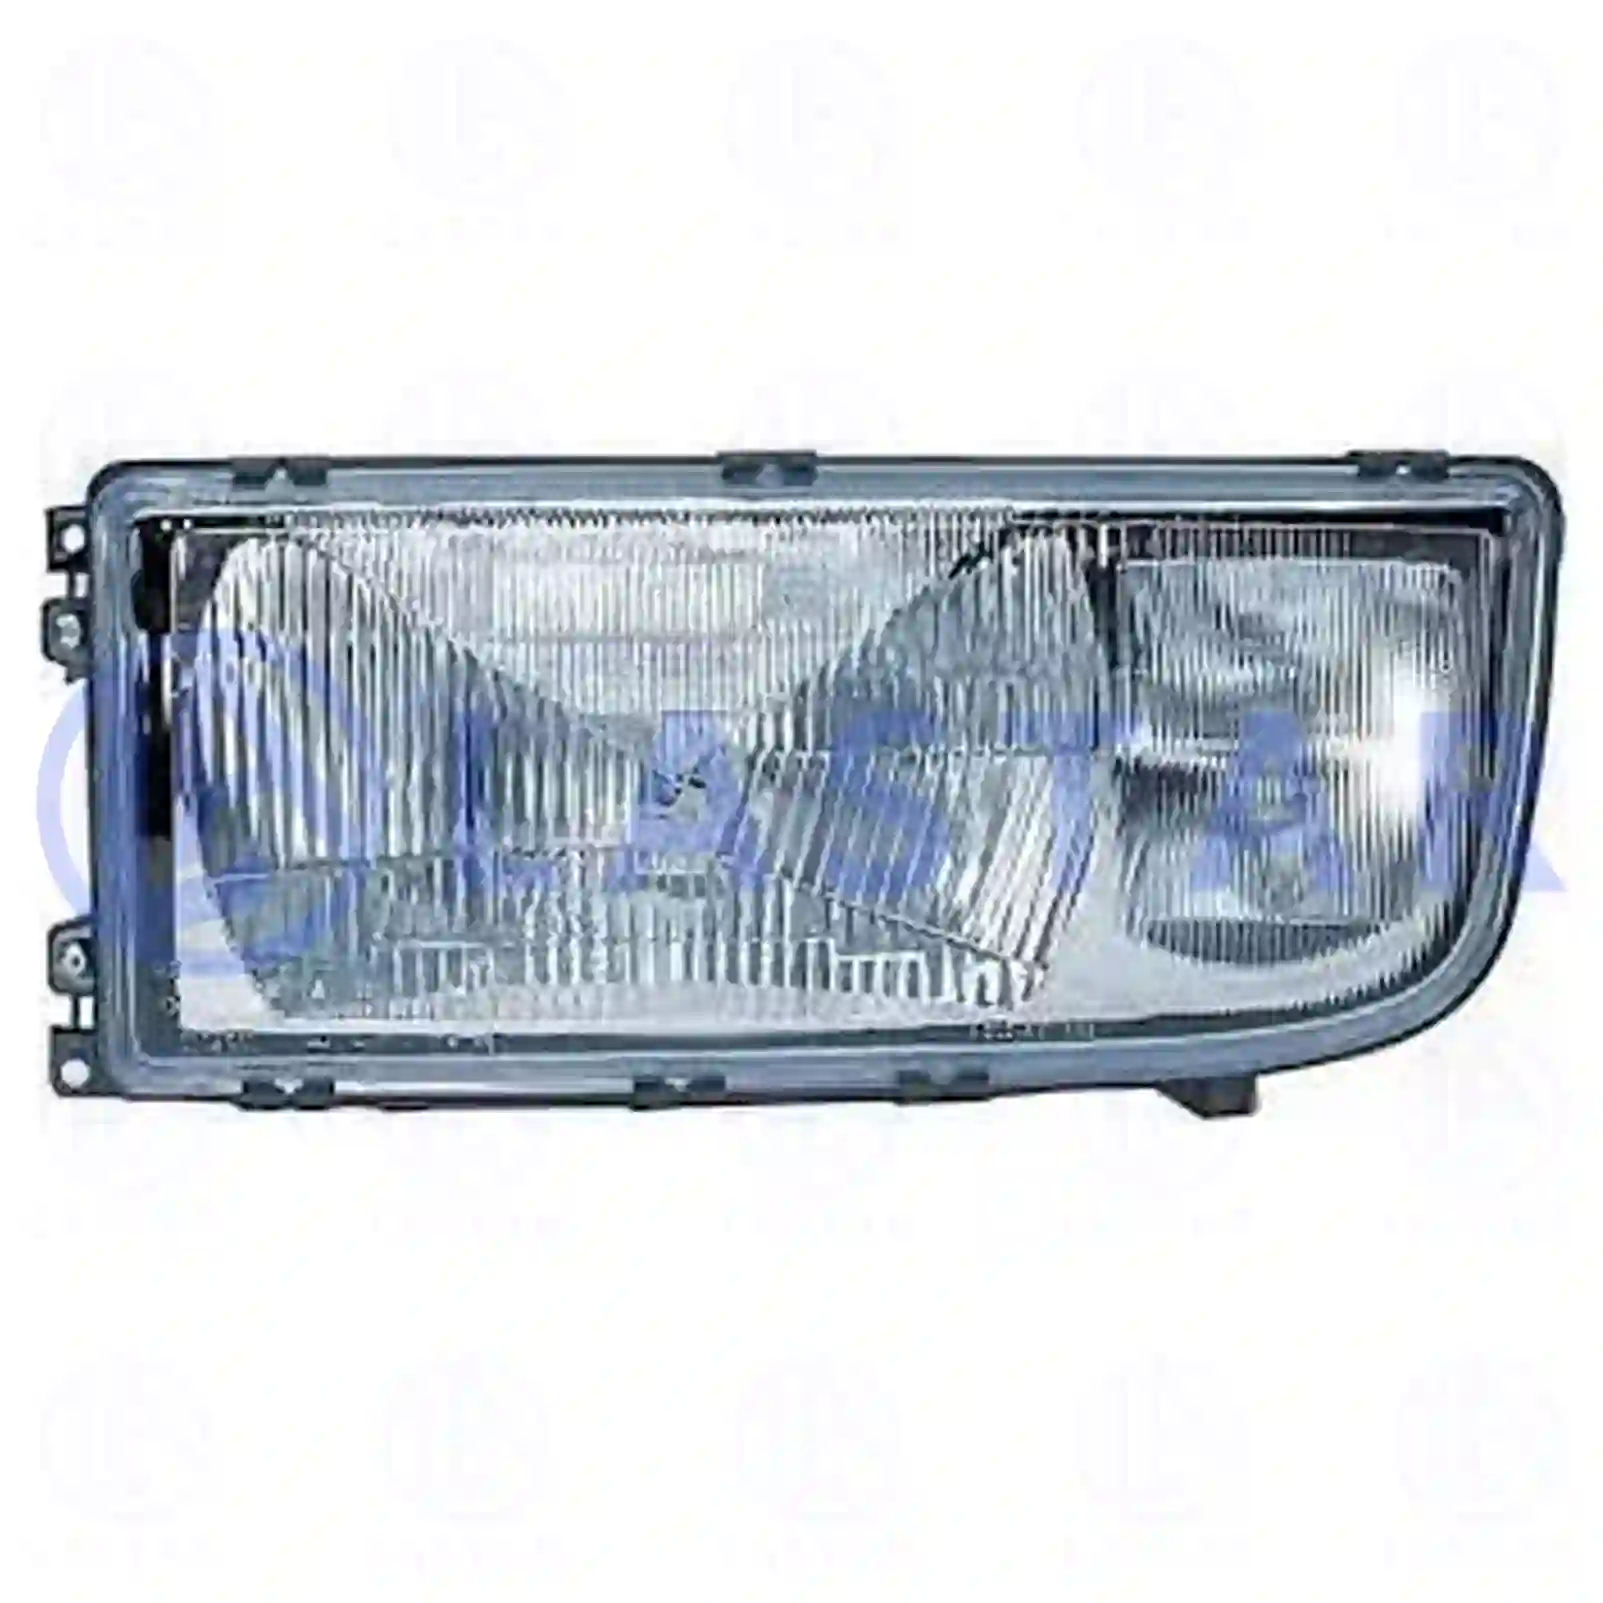 Headlamp, right, without bulbs, 77711725, 9418202661, 94182 ||  77711725 Lastar Spare Part | Truck Spare Parts, Auotomotive Spare Parts Headlamp, right, without bulbs, 77711725, 9418202661, 94182 ||  77711725 Lastar Spare Part | Truck Spare Parts, Auotomotive Spare Parts